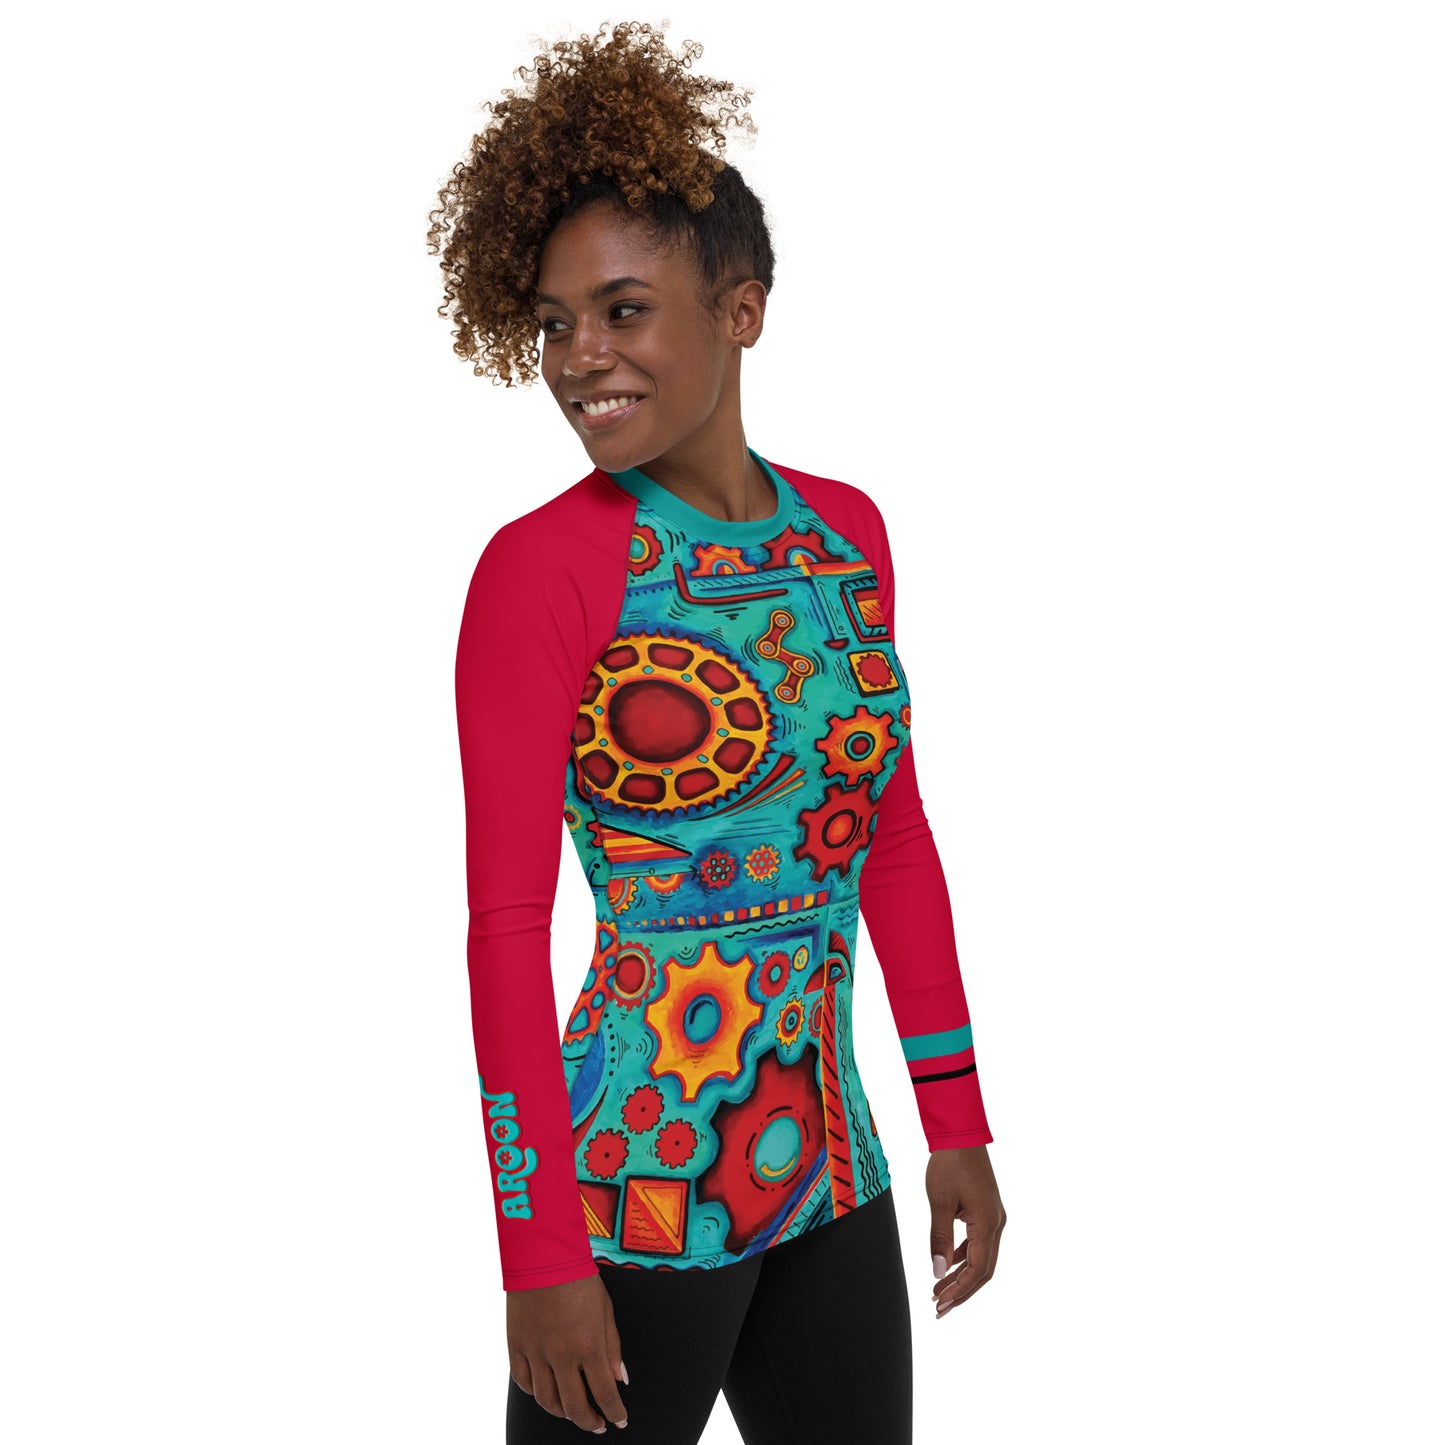 womens long sleeve cycling jersey in bold red orange and teal colors with a unique original handmade design by MeganAroon for the boutique cycling brand AROON